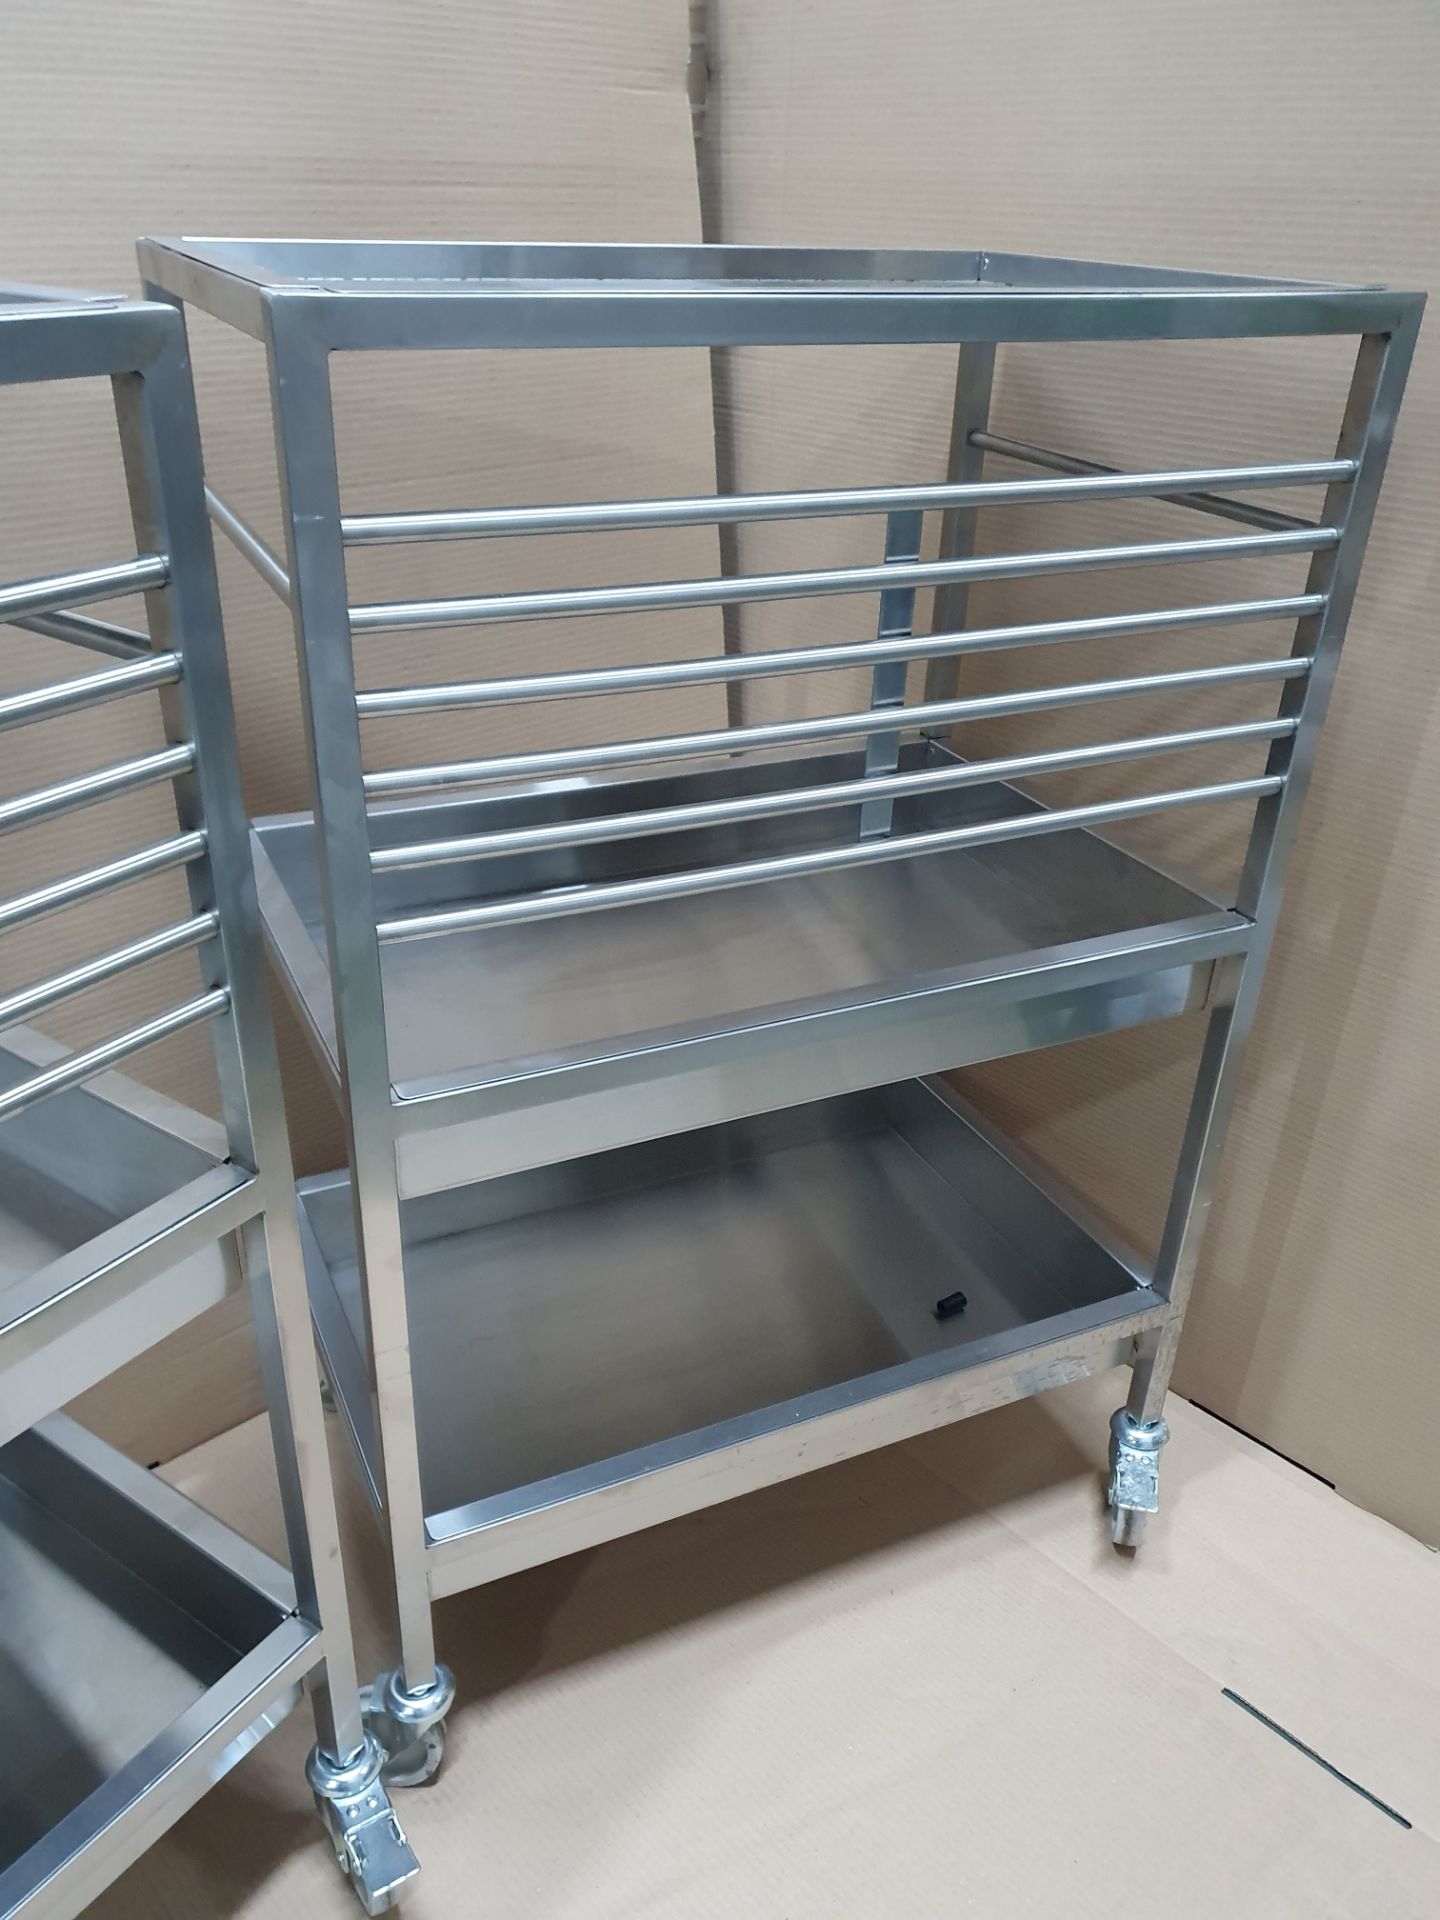 2 x 3 tier Metal trollies on Wheels with Removable Shelves - Image 6 of 7